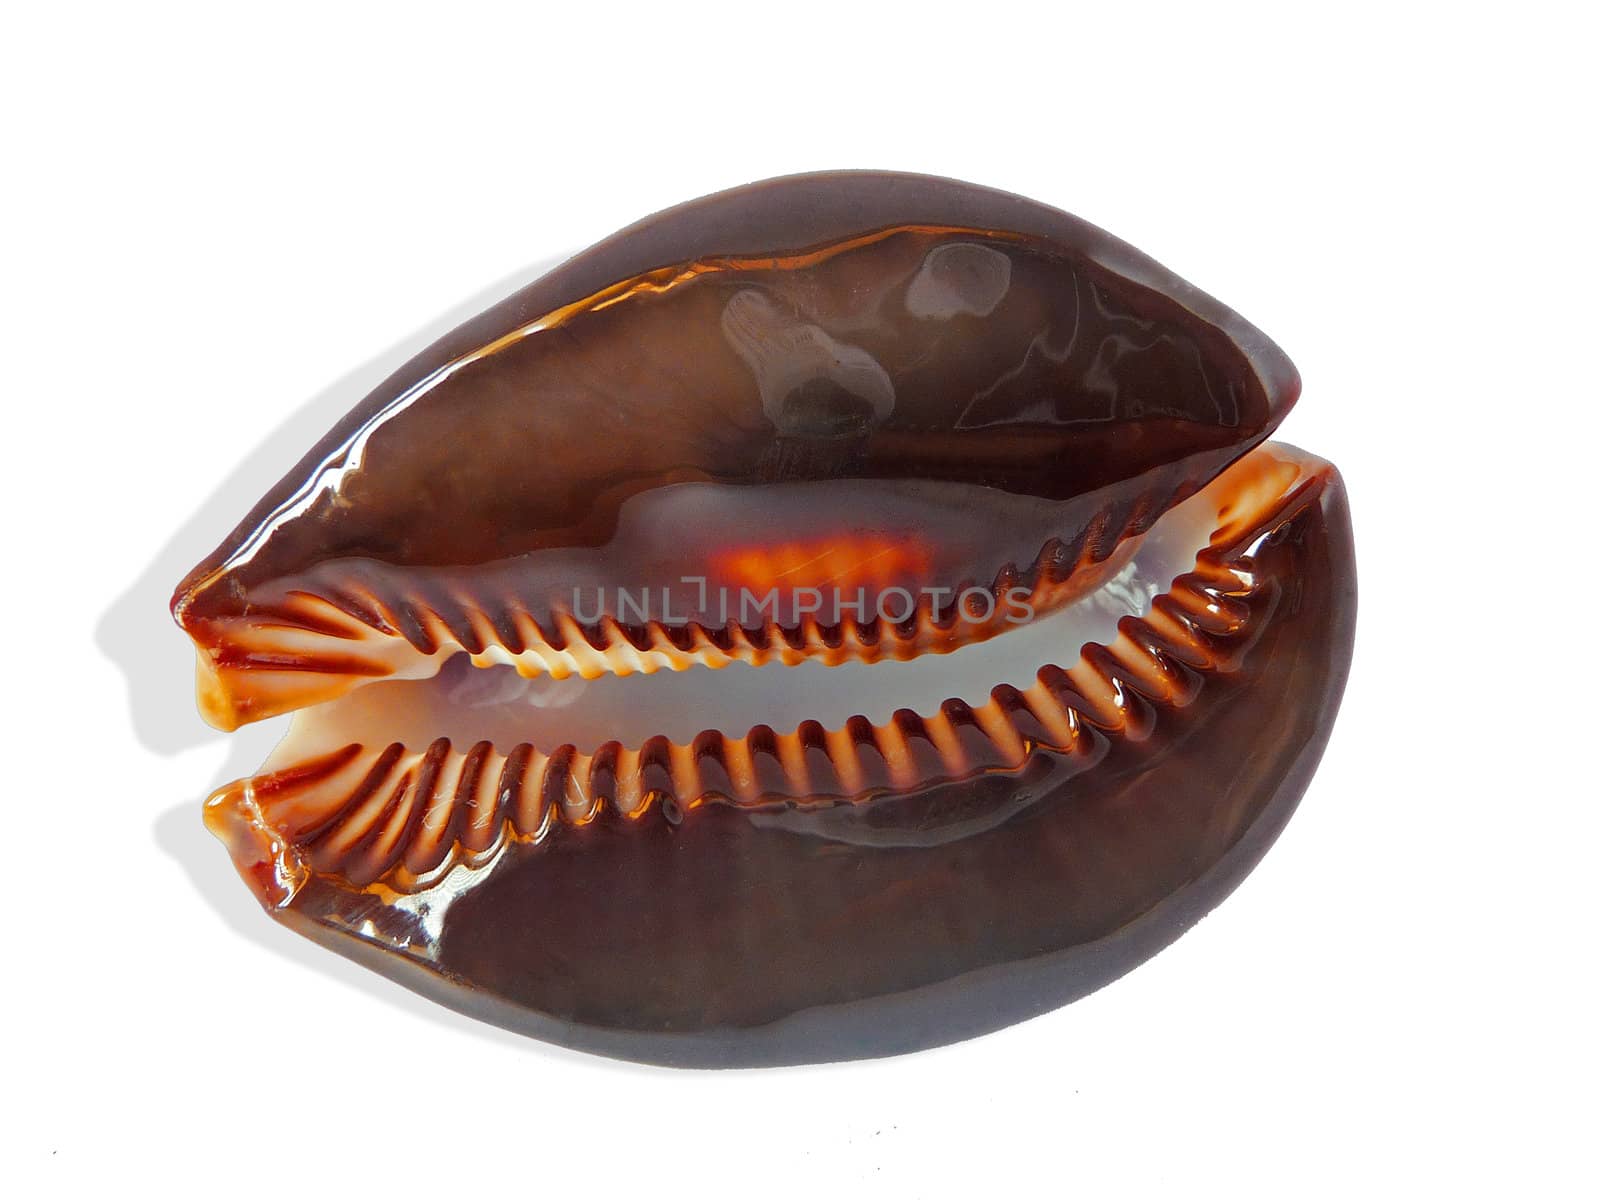 Shell of kauris on a white background